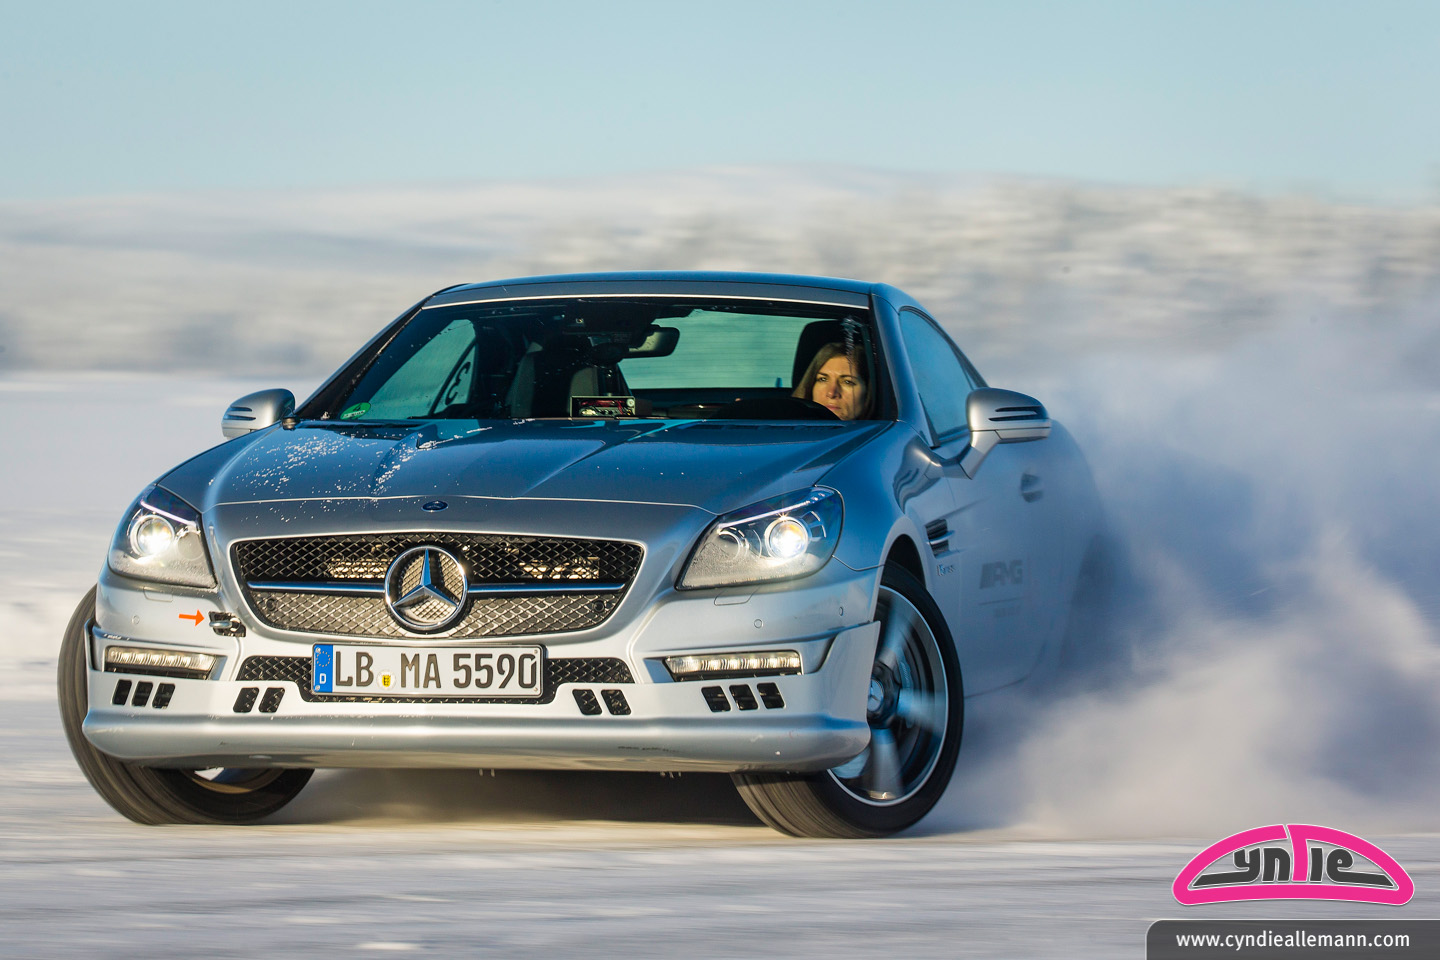 AMG Driving Academy: AMG Winter Sporting, Suède